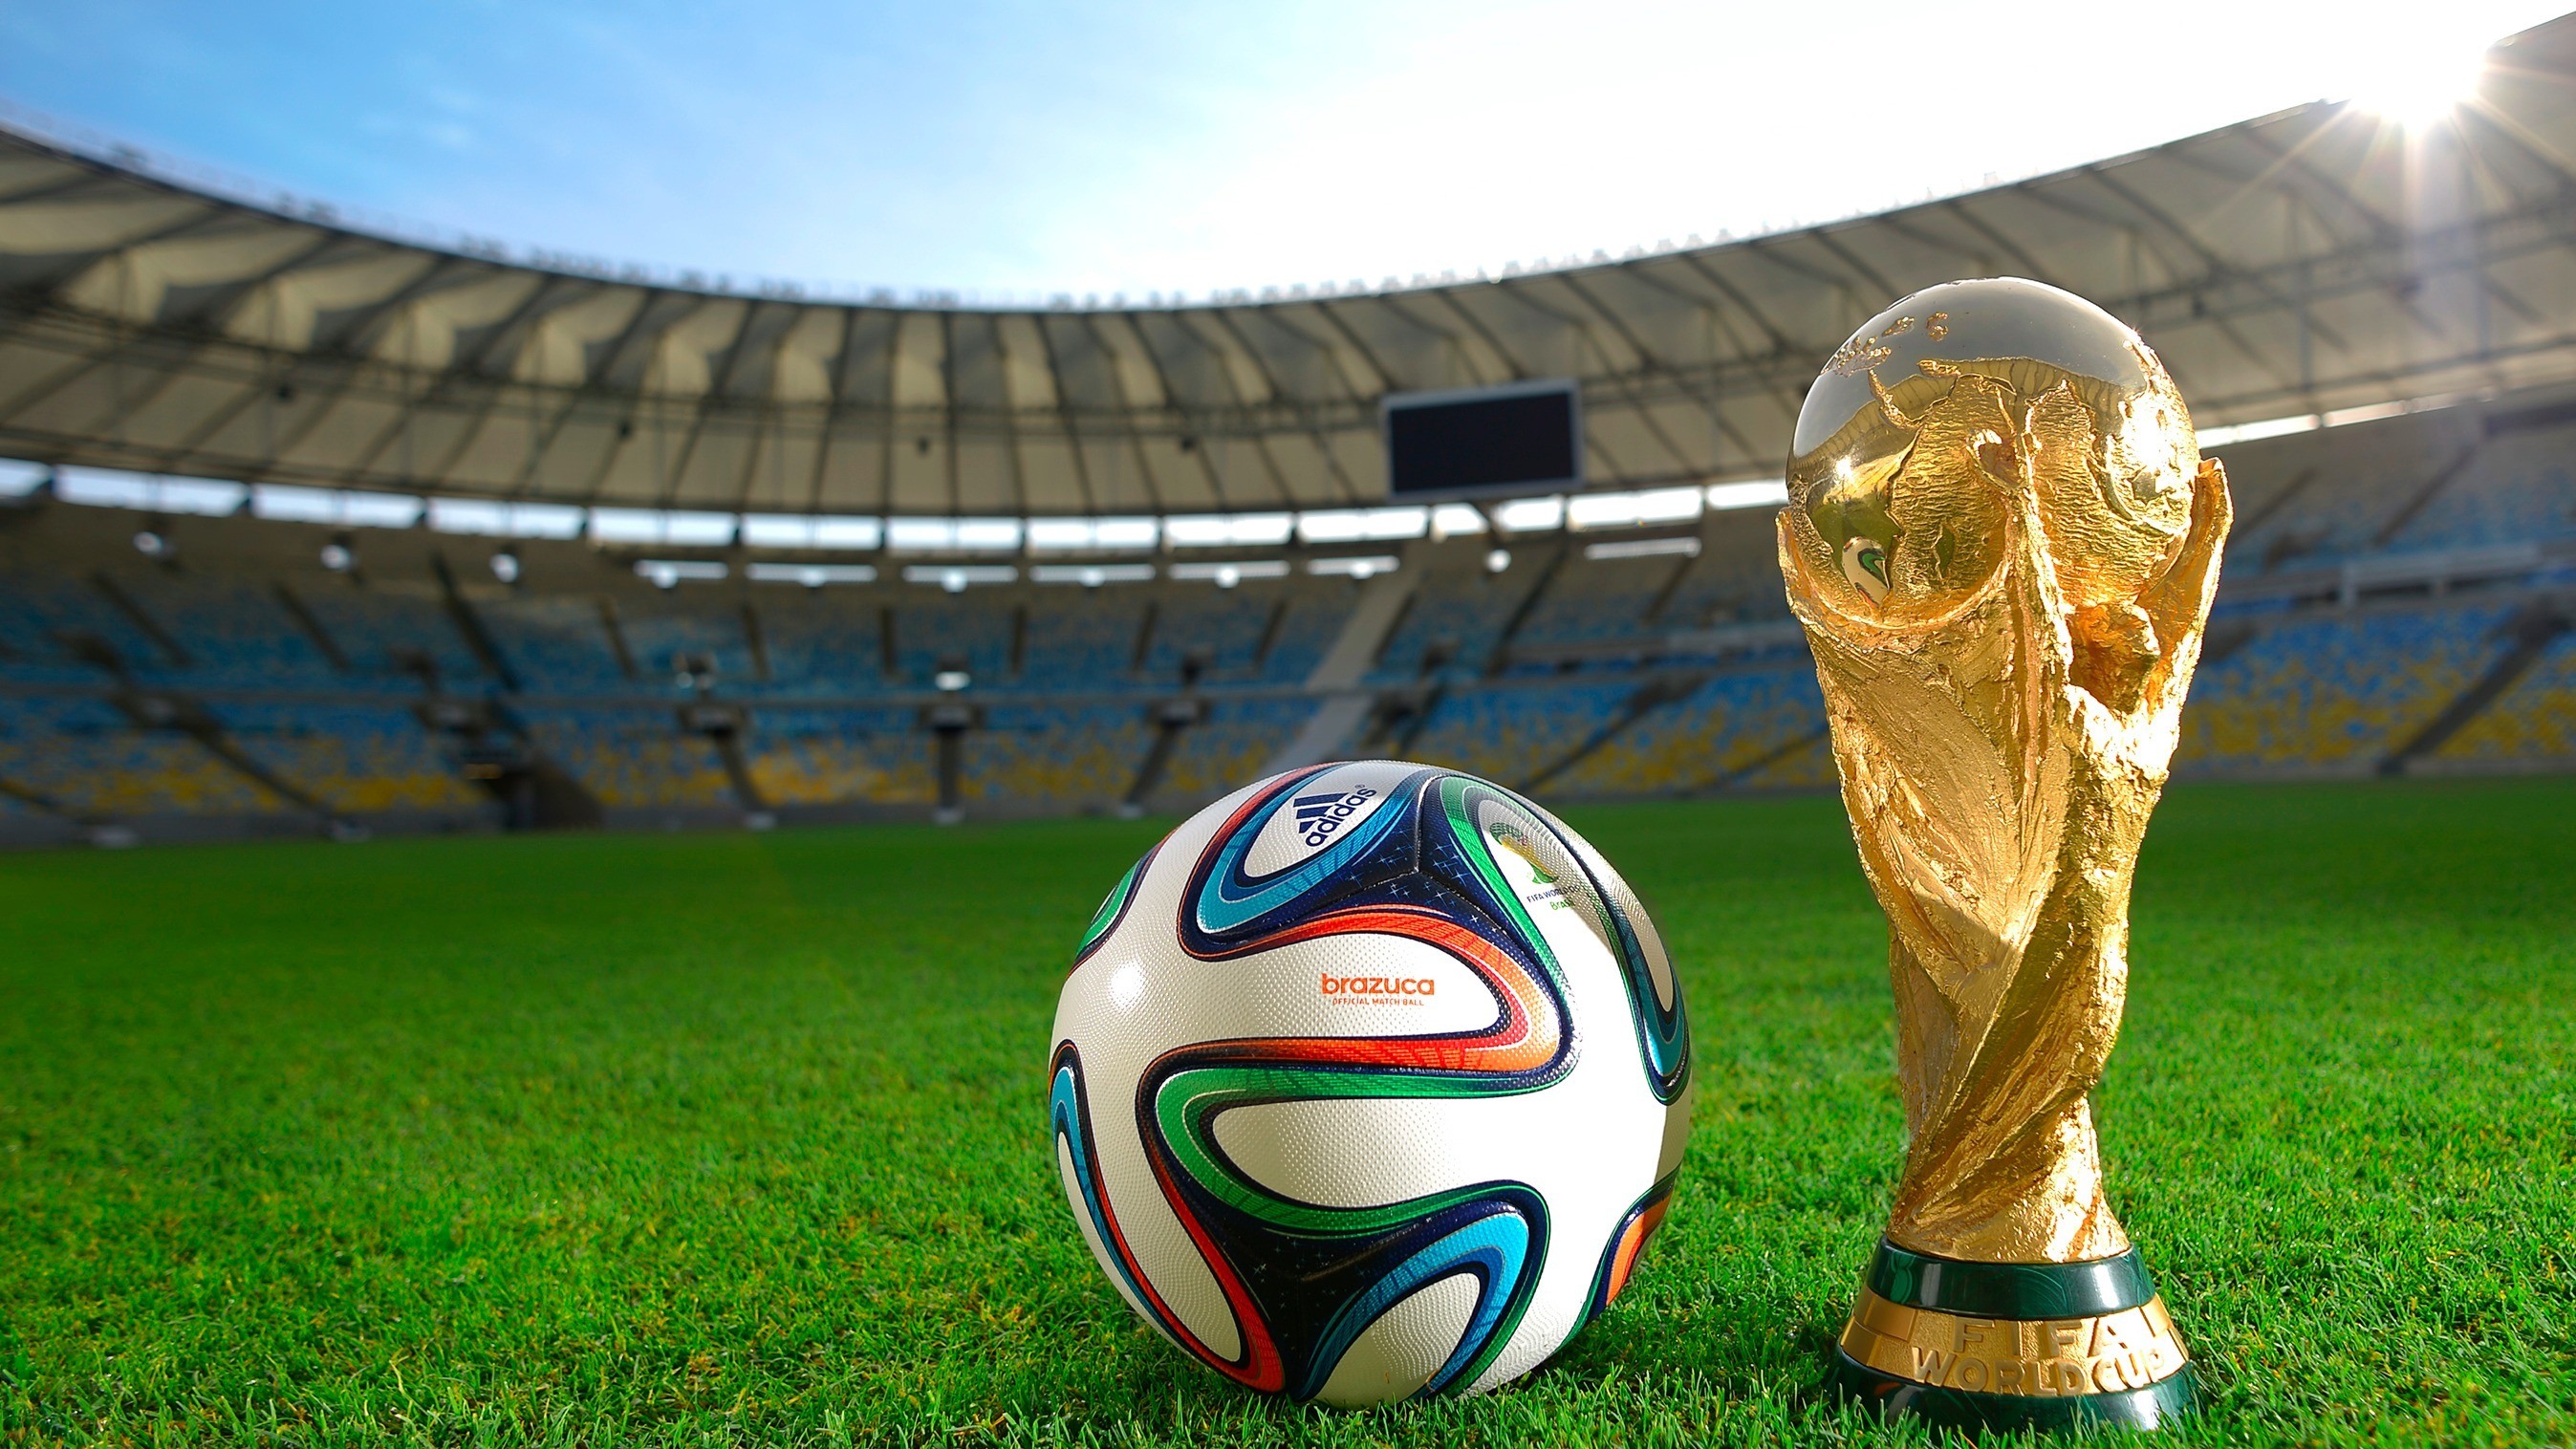 FIFA World Cup Brasil 2014 Trophy And Ball Photo Picture HD Wallpaper